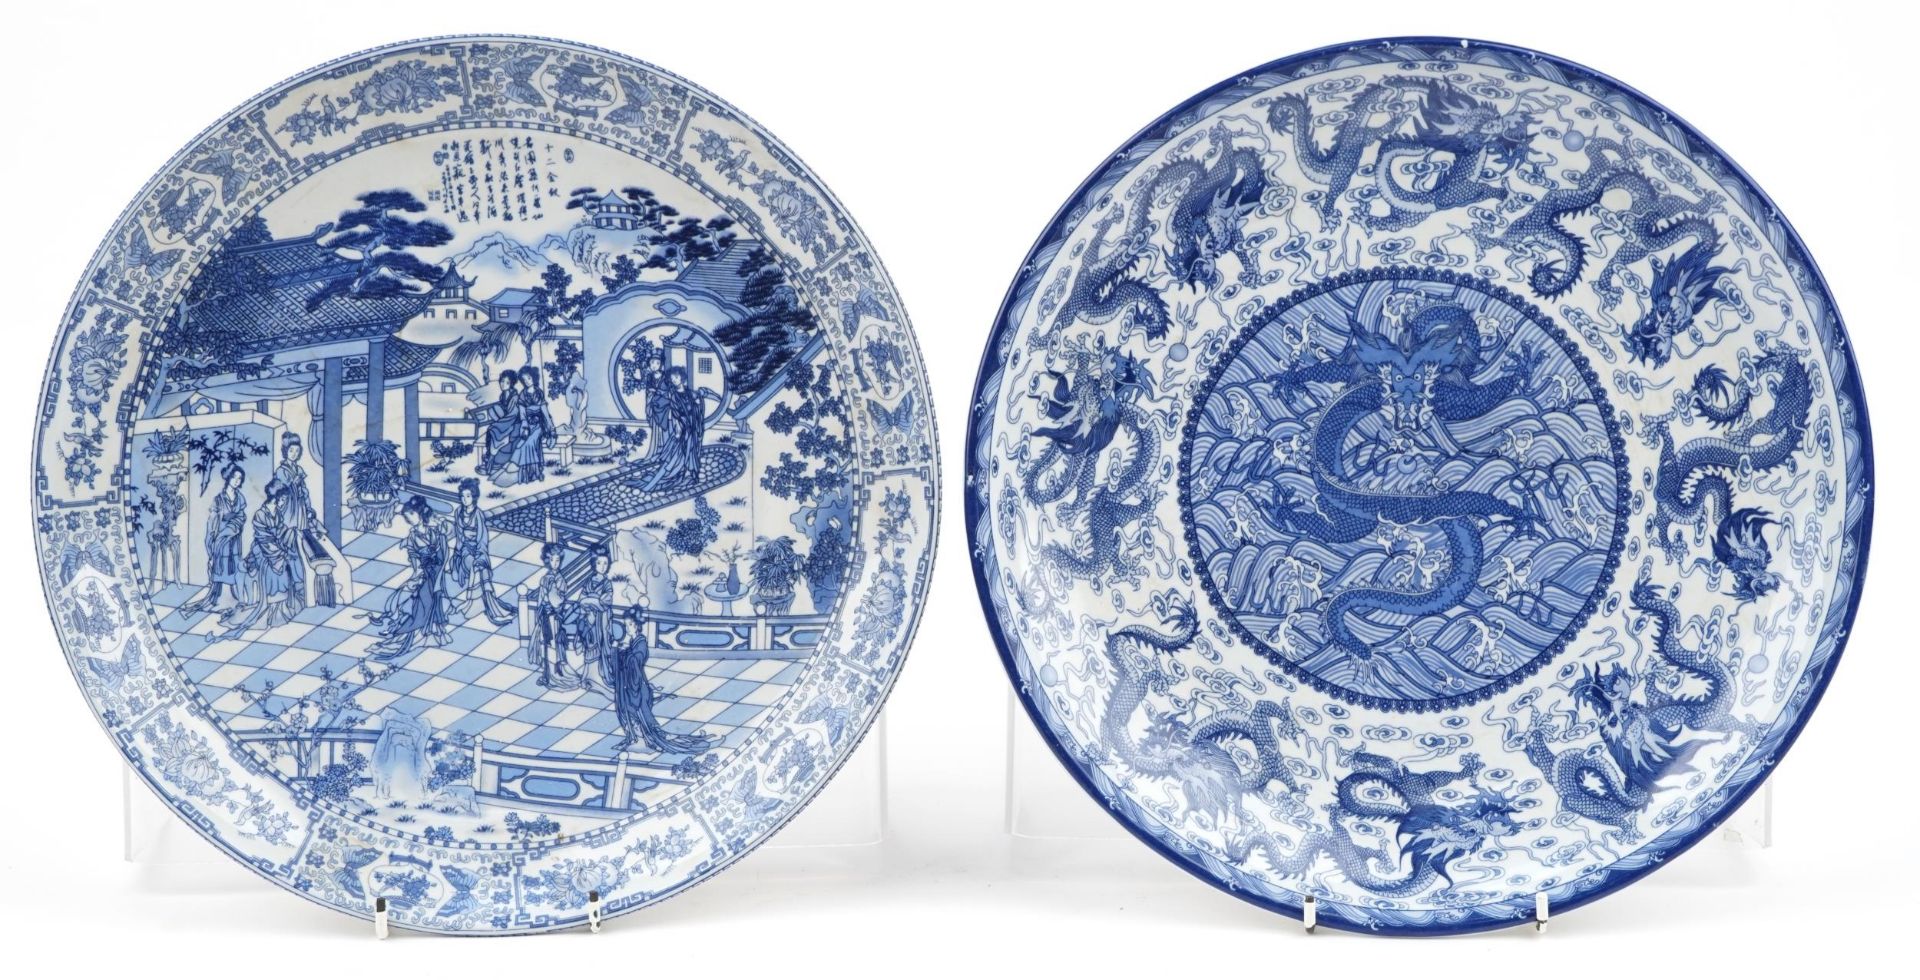 Pair of Chinese blue and white porcelain chargers decorated with figures in a palace setting and